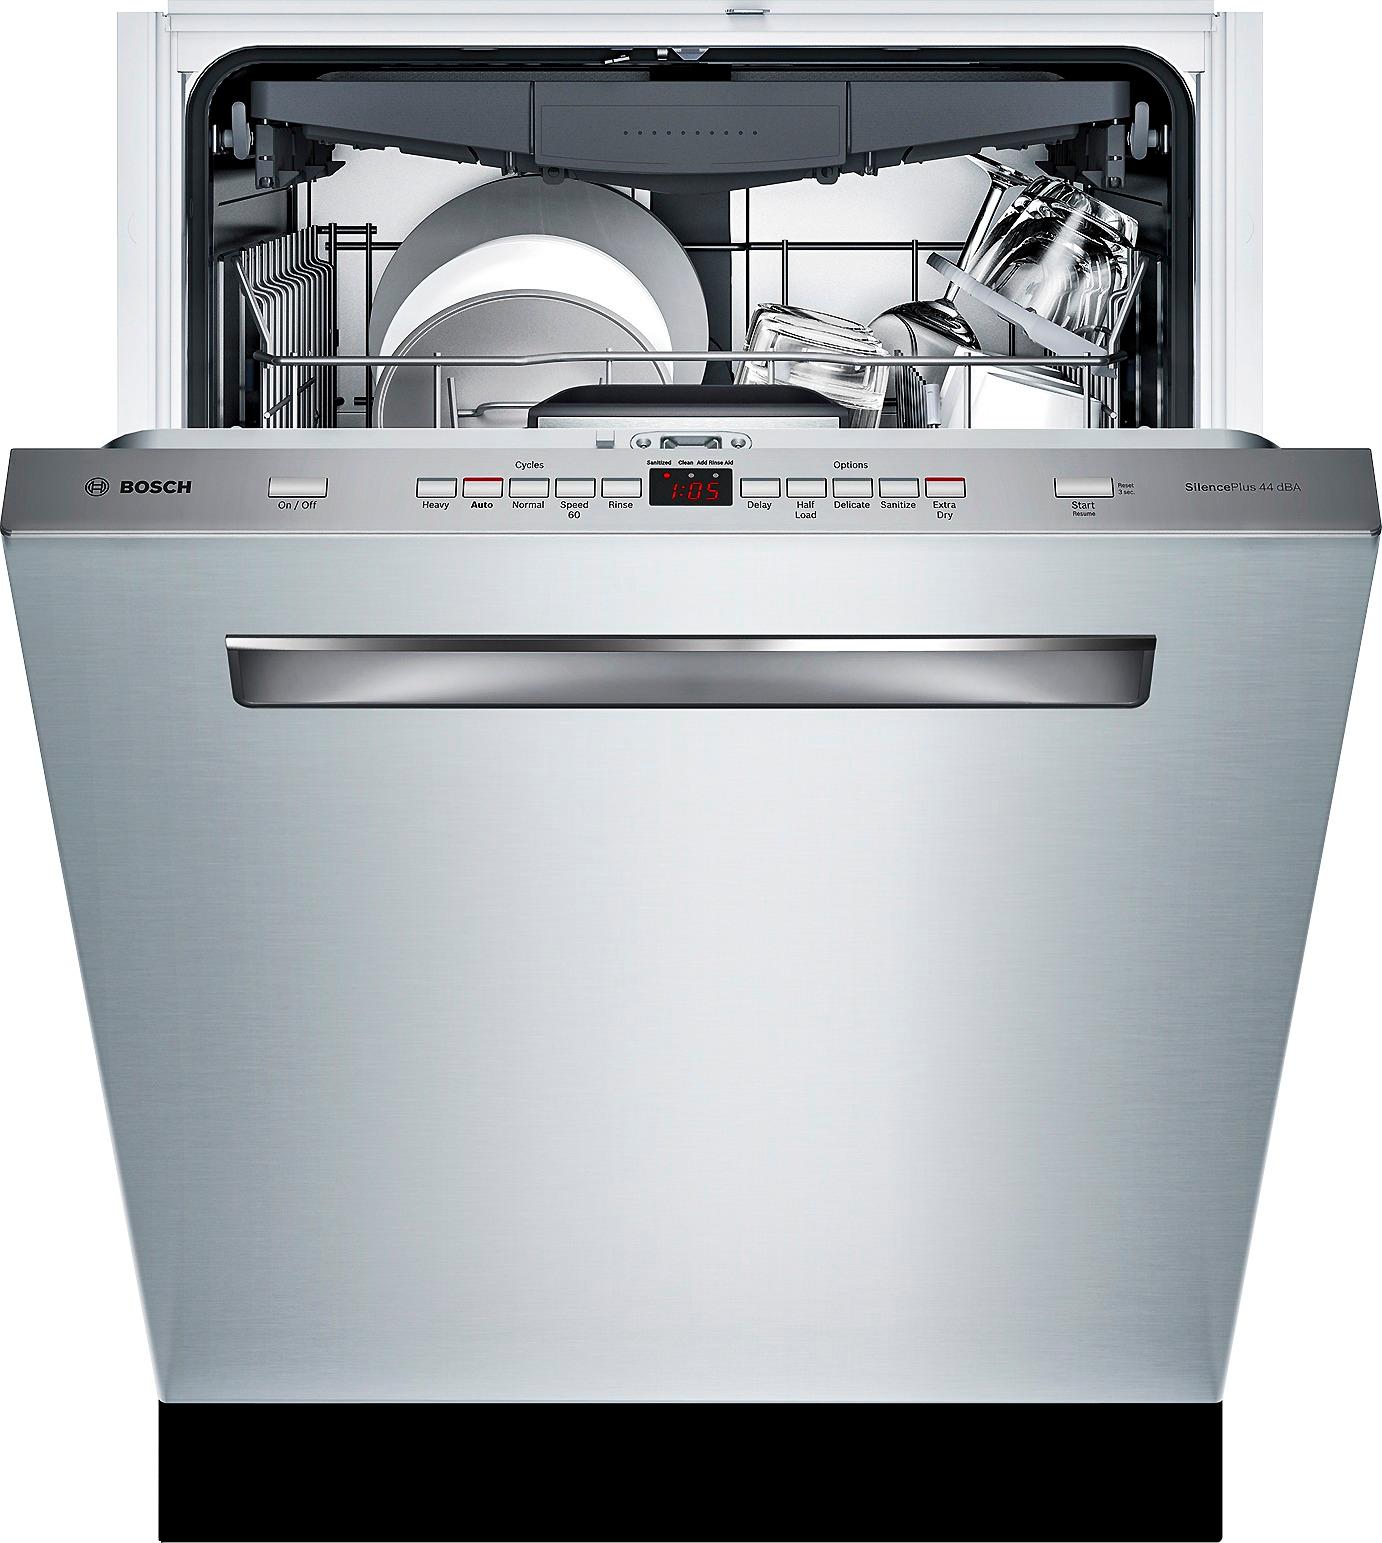 Bosch 500 Series 24" Pocket Handle Dishwasher with Stainless Steel Tub